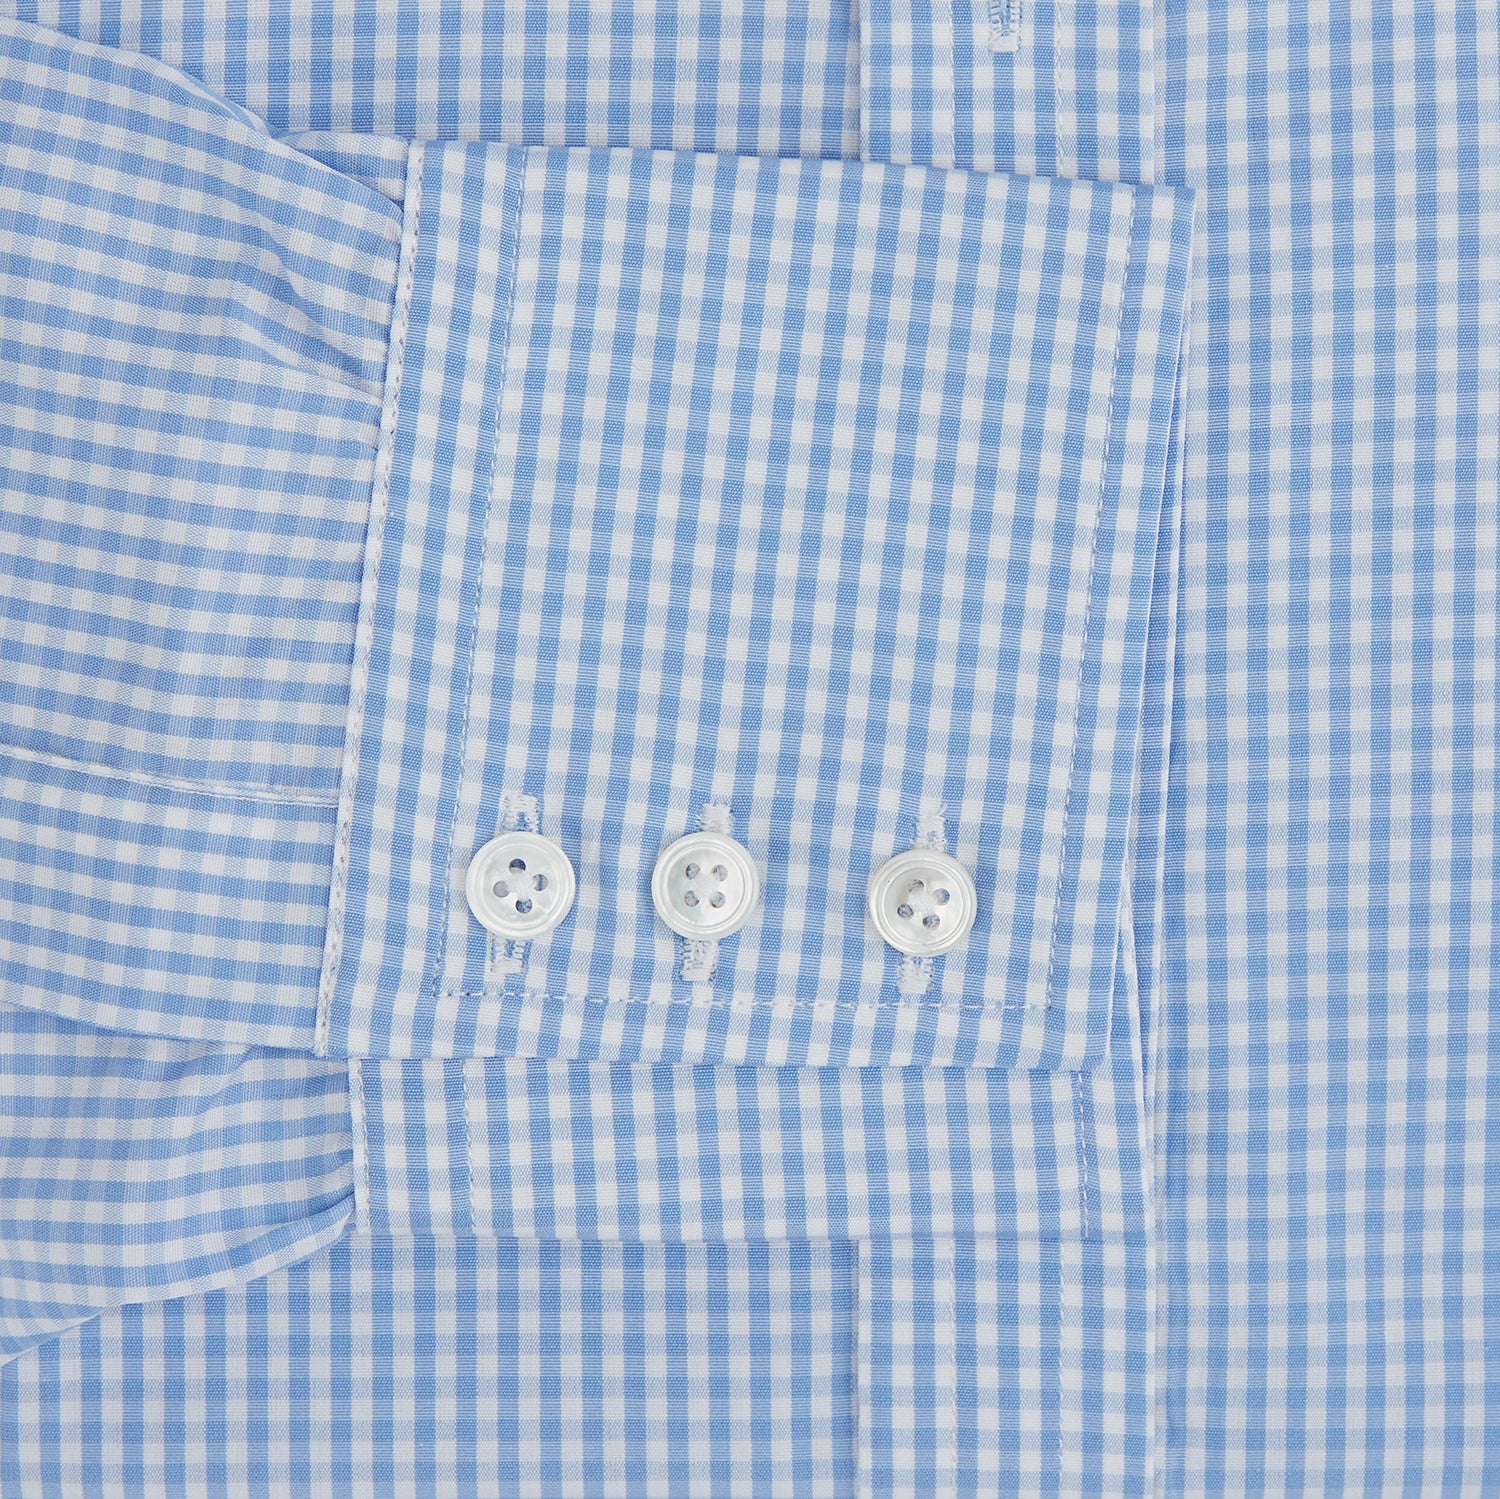 Light Blue Gingham Check Shirt with T&A Collar and 3-Button Cuffs